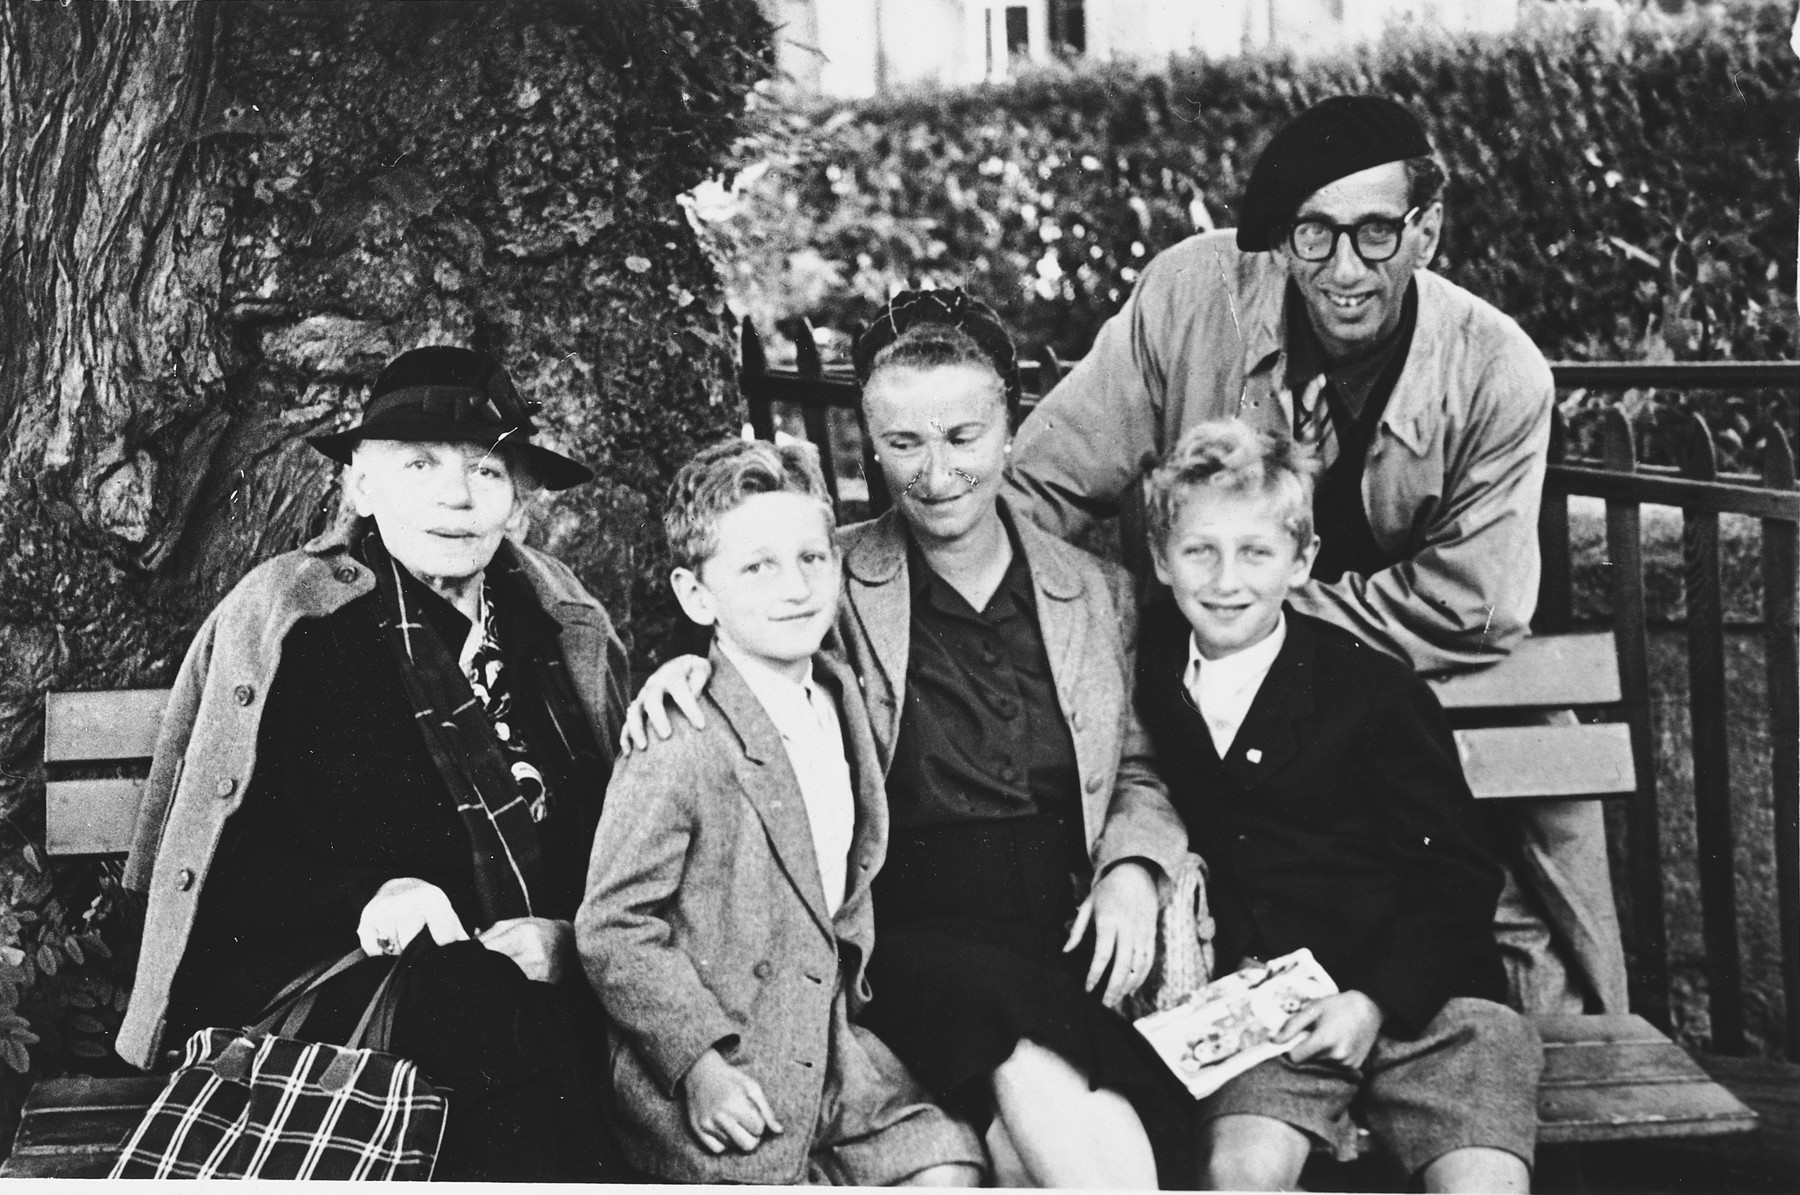 Group portrait of a Jewish refugee family seated on a park bench in Geneva.

From left to right are Renate Hirsch, Claude, Ines Walter and Andre Limot.